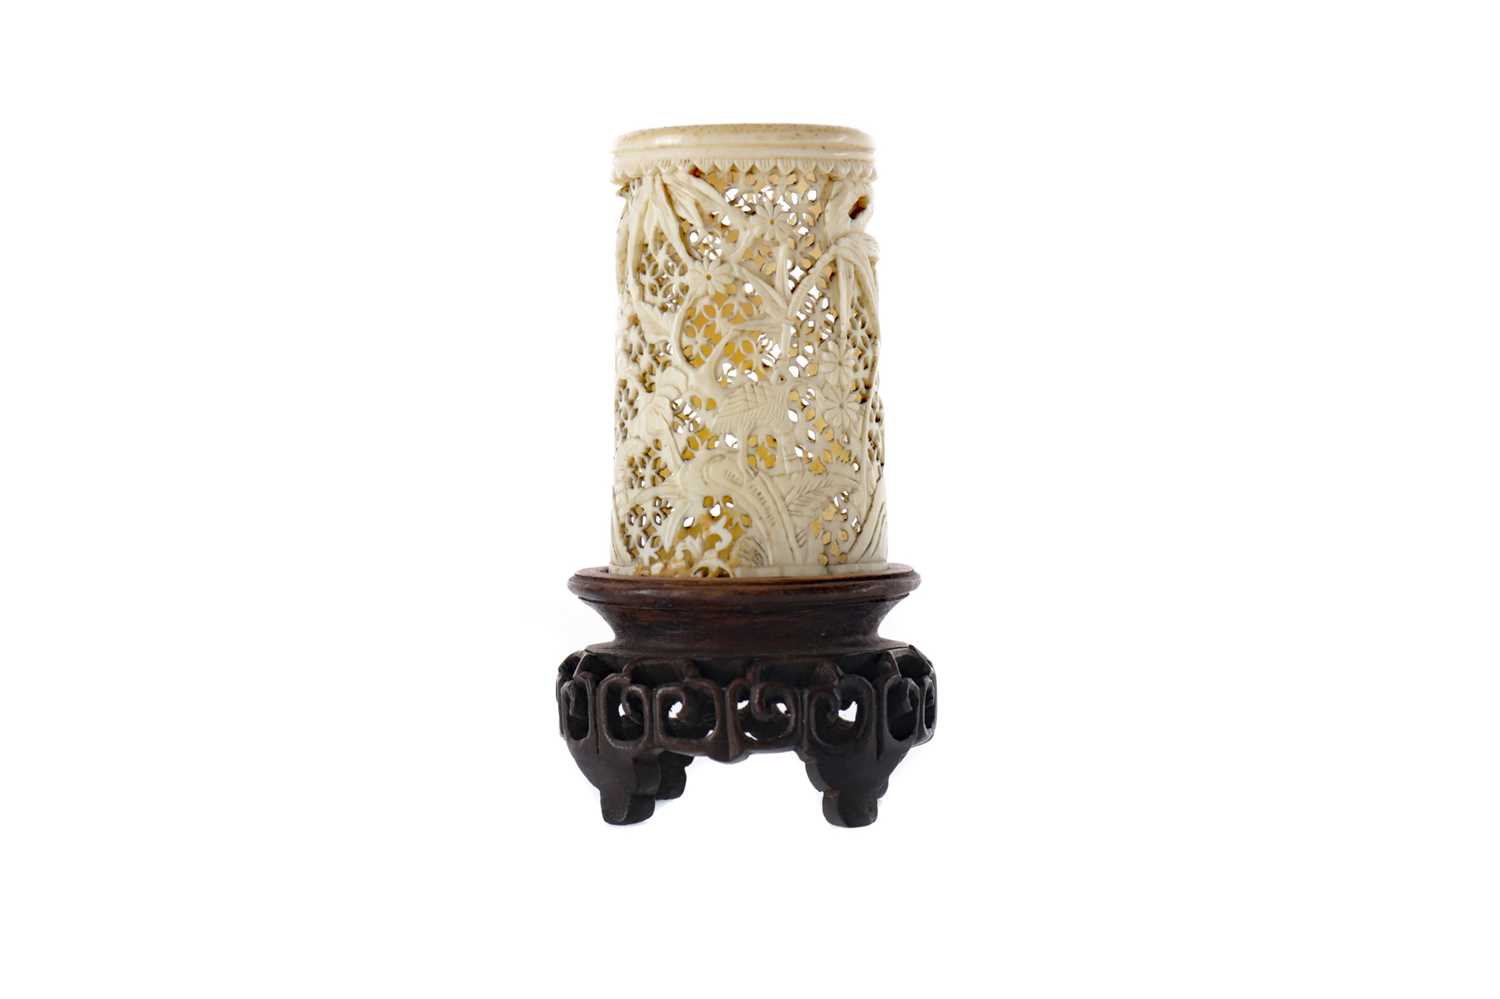 Lot 793 - AN EARLY 20TH CENTURY CHINESE CARVED AND PIERCED IVORY VASE